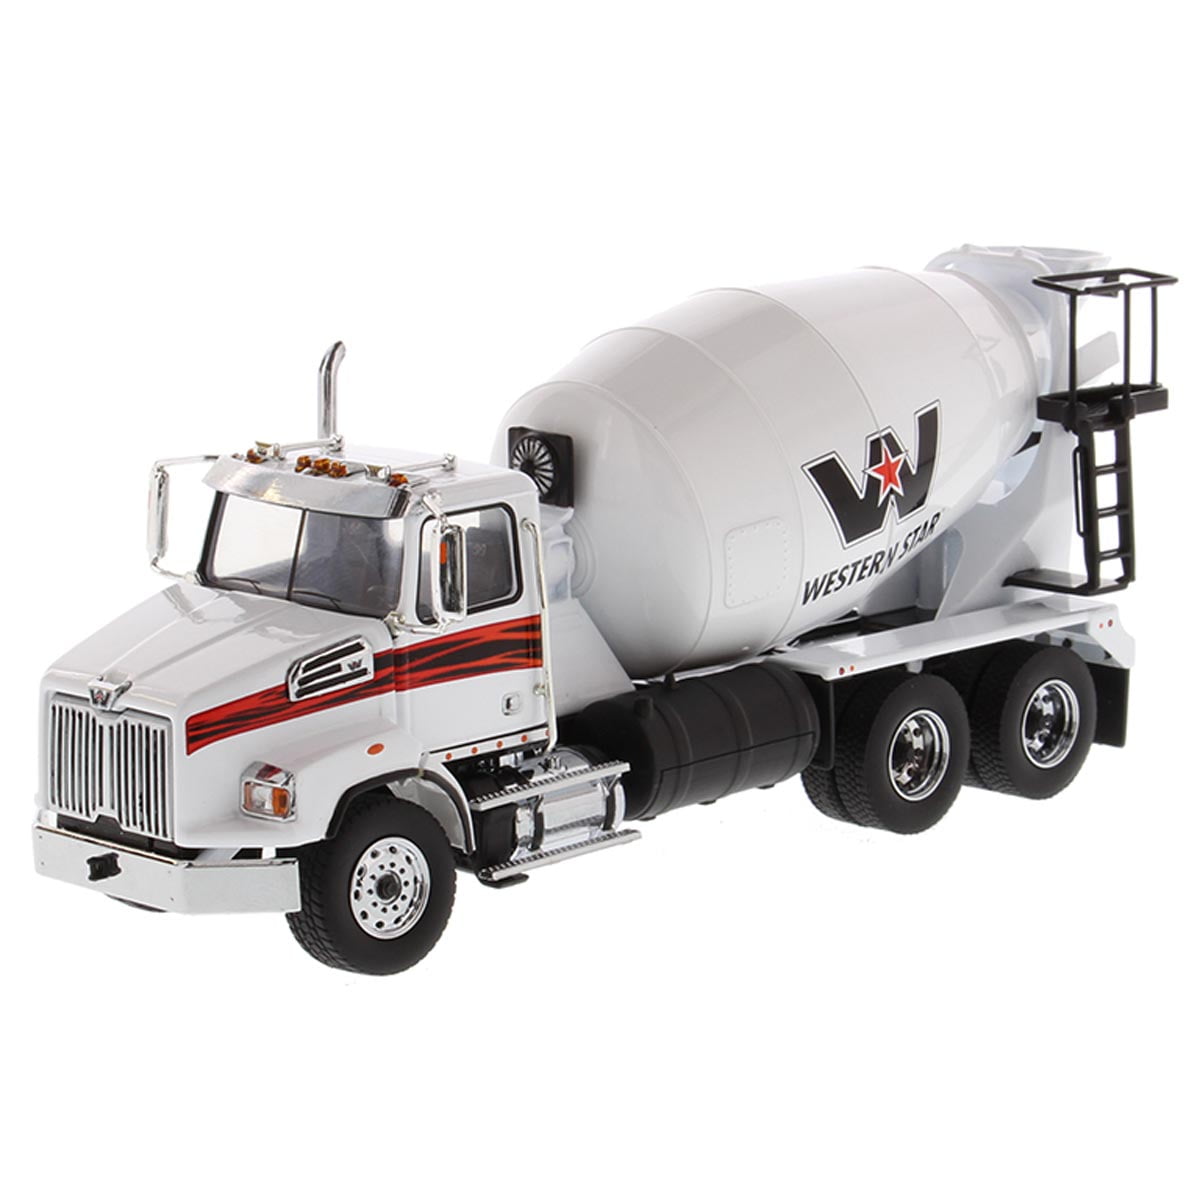 1/50 Western Star 4700 SB Dump Truck White Model by Diecast Masters 71034 for sale online